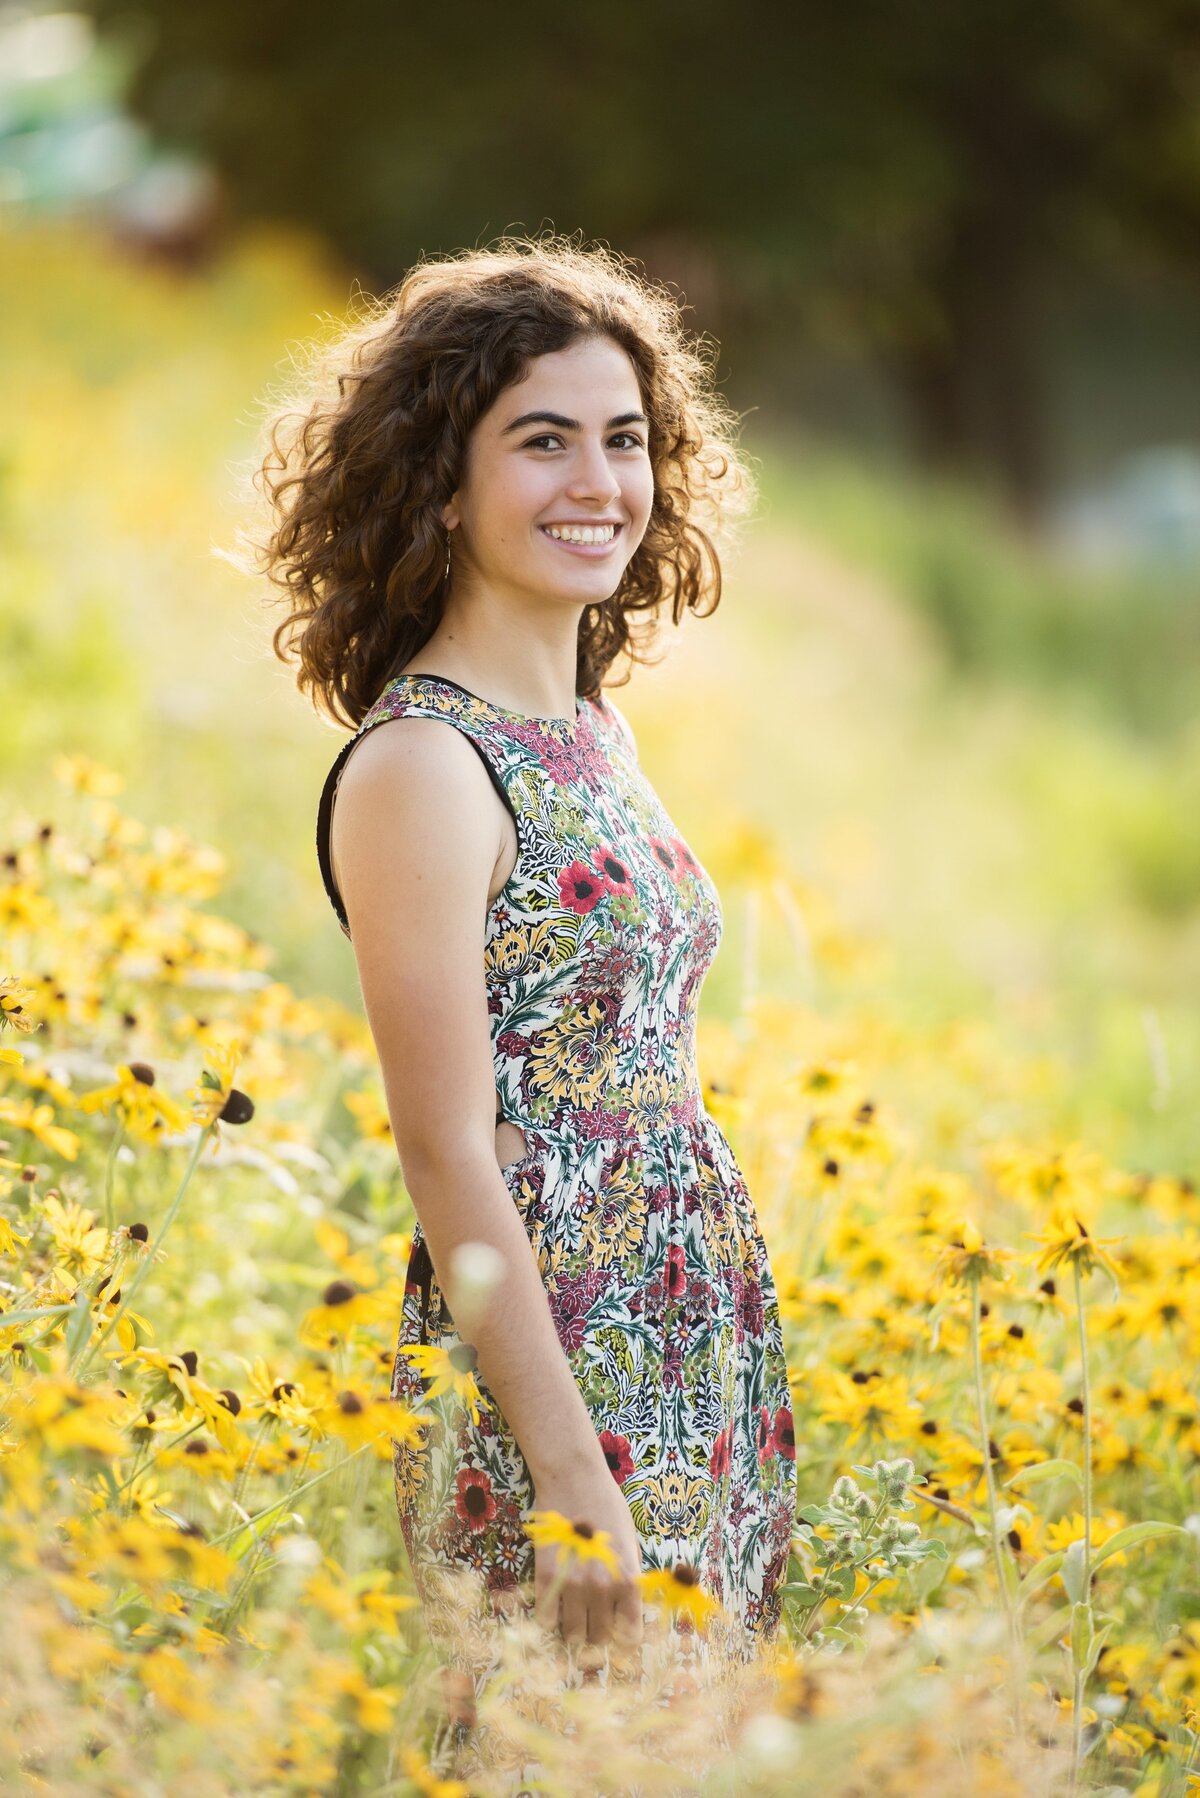 Edina Minnesota grad photo of girl in dress in a field of yellow flowers in nature